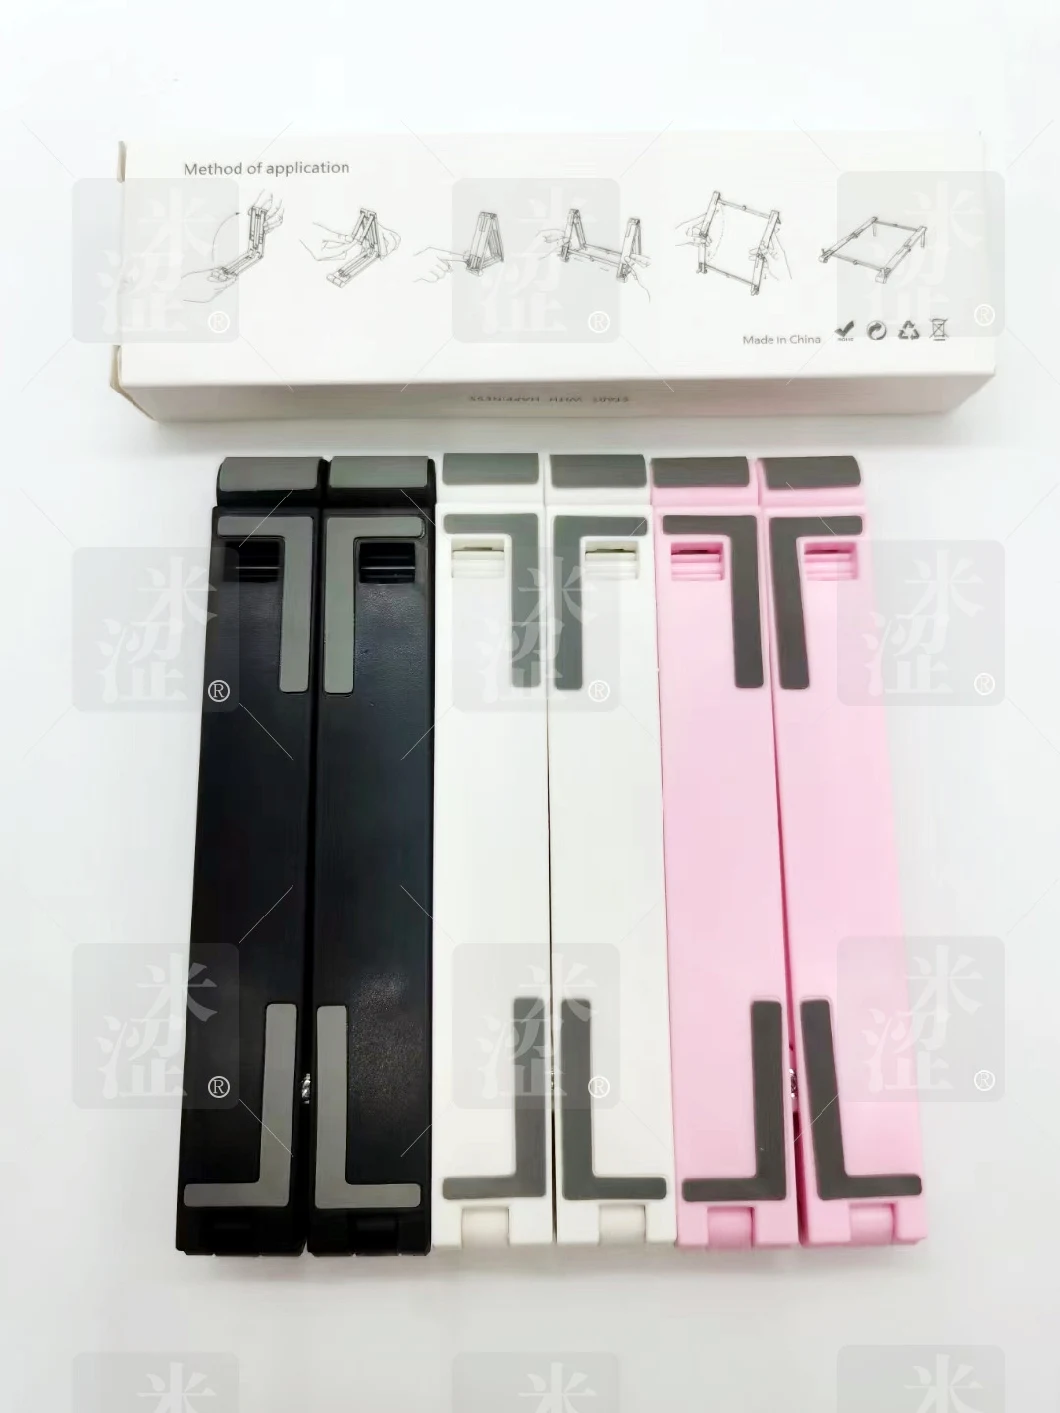 Semi, Multifunction Lap Top Stand Portable Laptop 3 in 1, Mobile Phone, iPad, White Pink Black